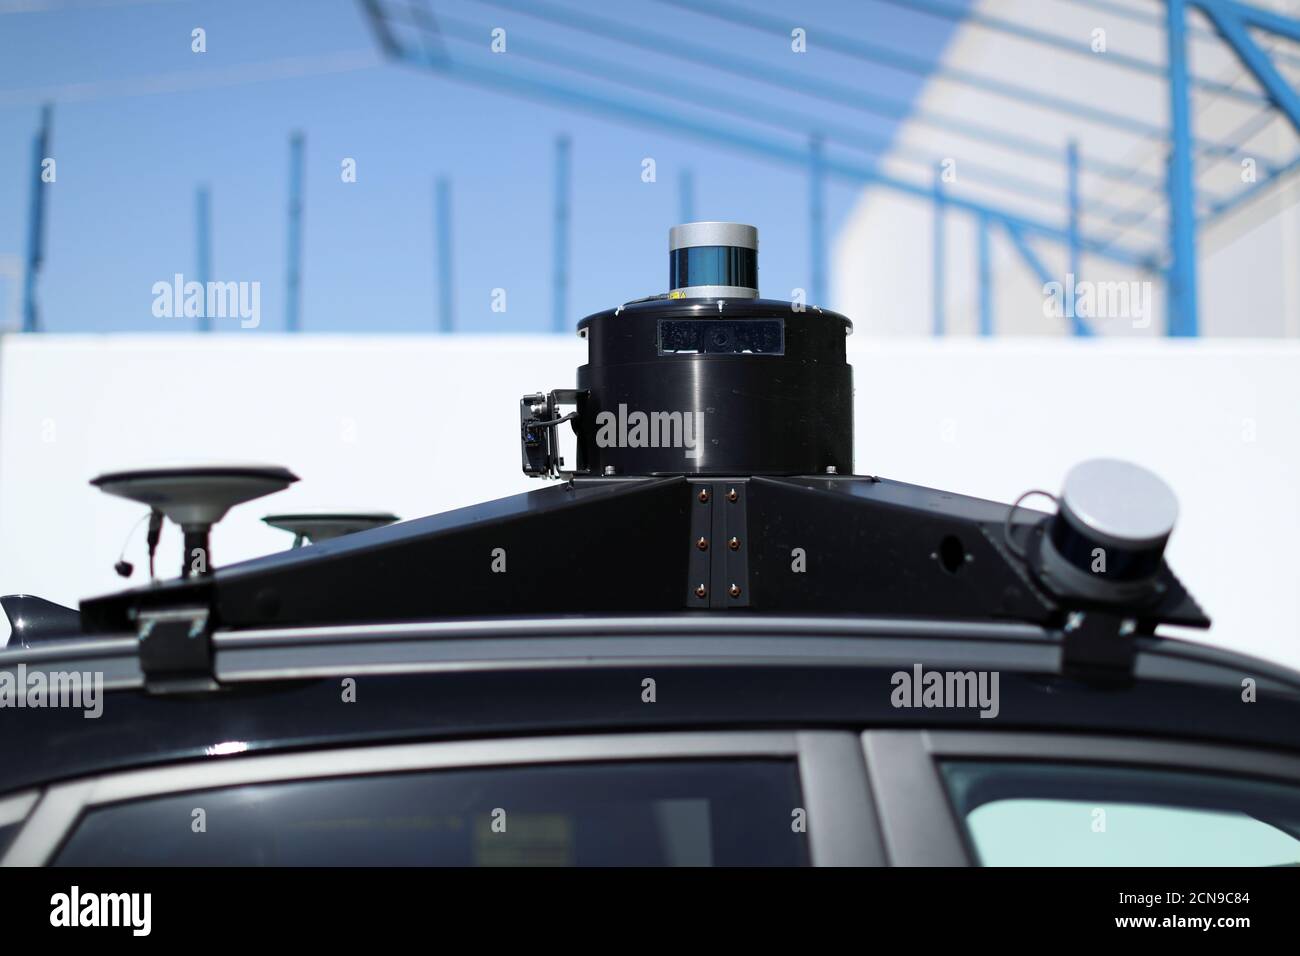 Lidar, cameras and GPS sensors are shown on top of a Hyundai electric vehicle as self driving company Pony.ai begins to provide autonomous electric vehicles to deliver packages from local e-commerce platform Yamibuy during the outbreak of the coronavirus disease (COVID-19) in Irvine, California, U.S., April 28, 2020. REUTERS/Mike Blake Stock Photo